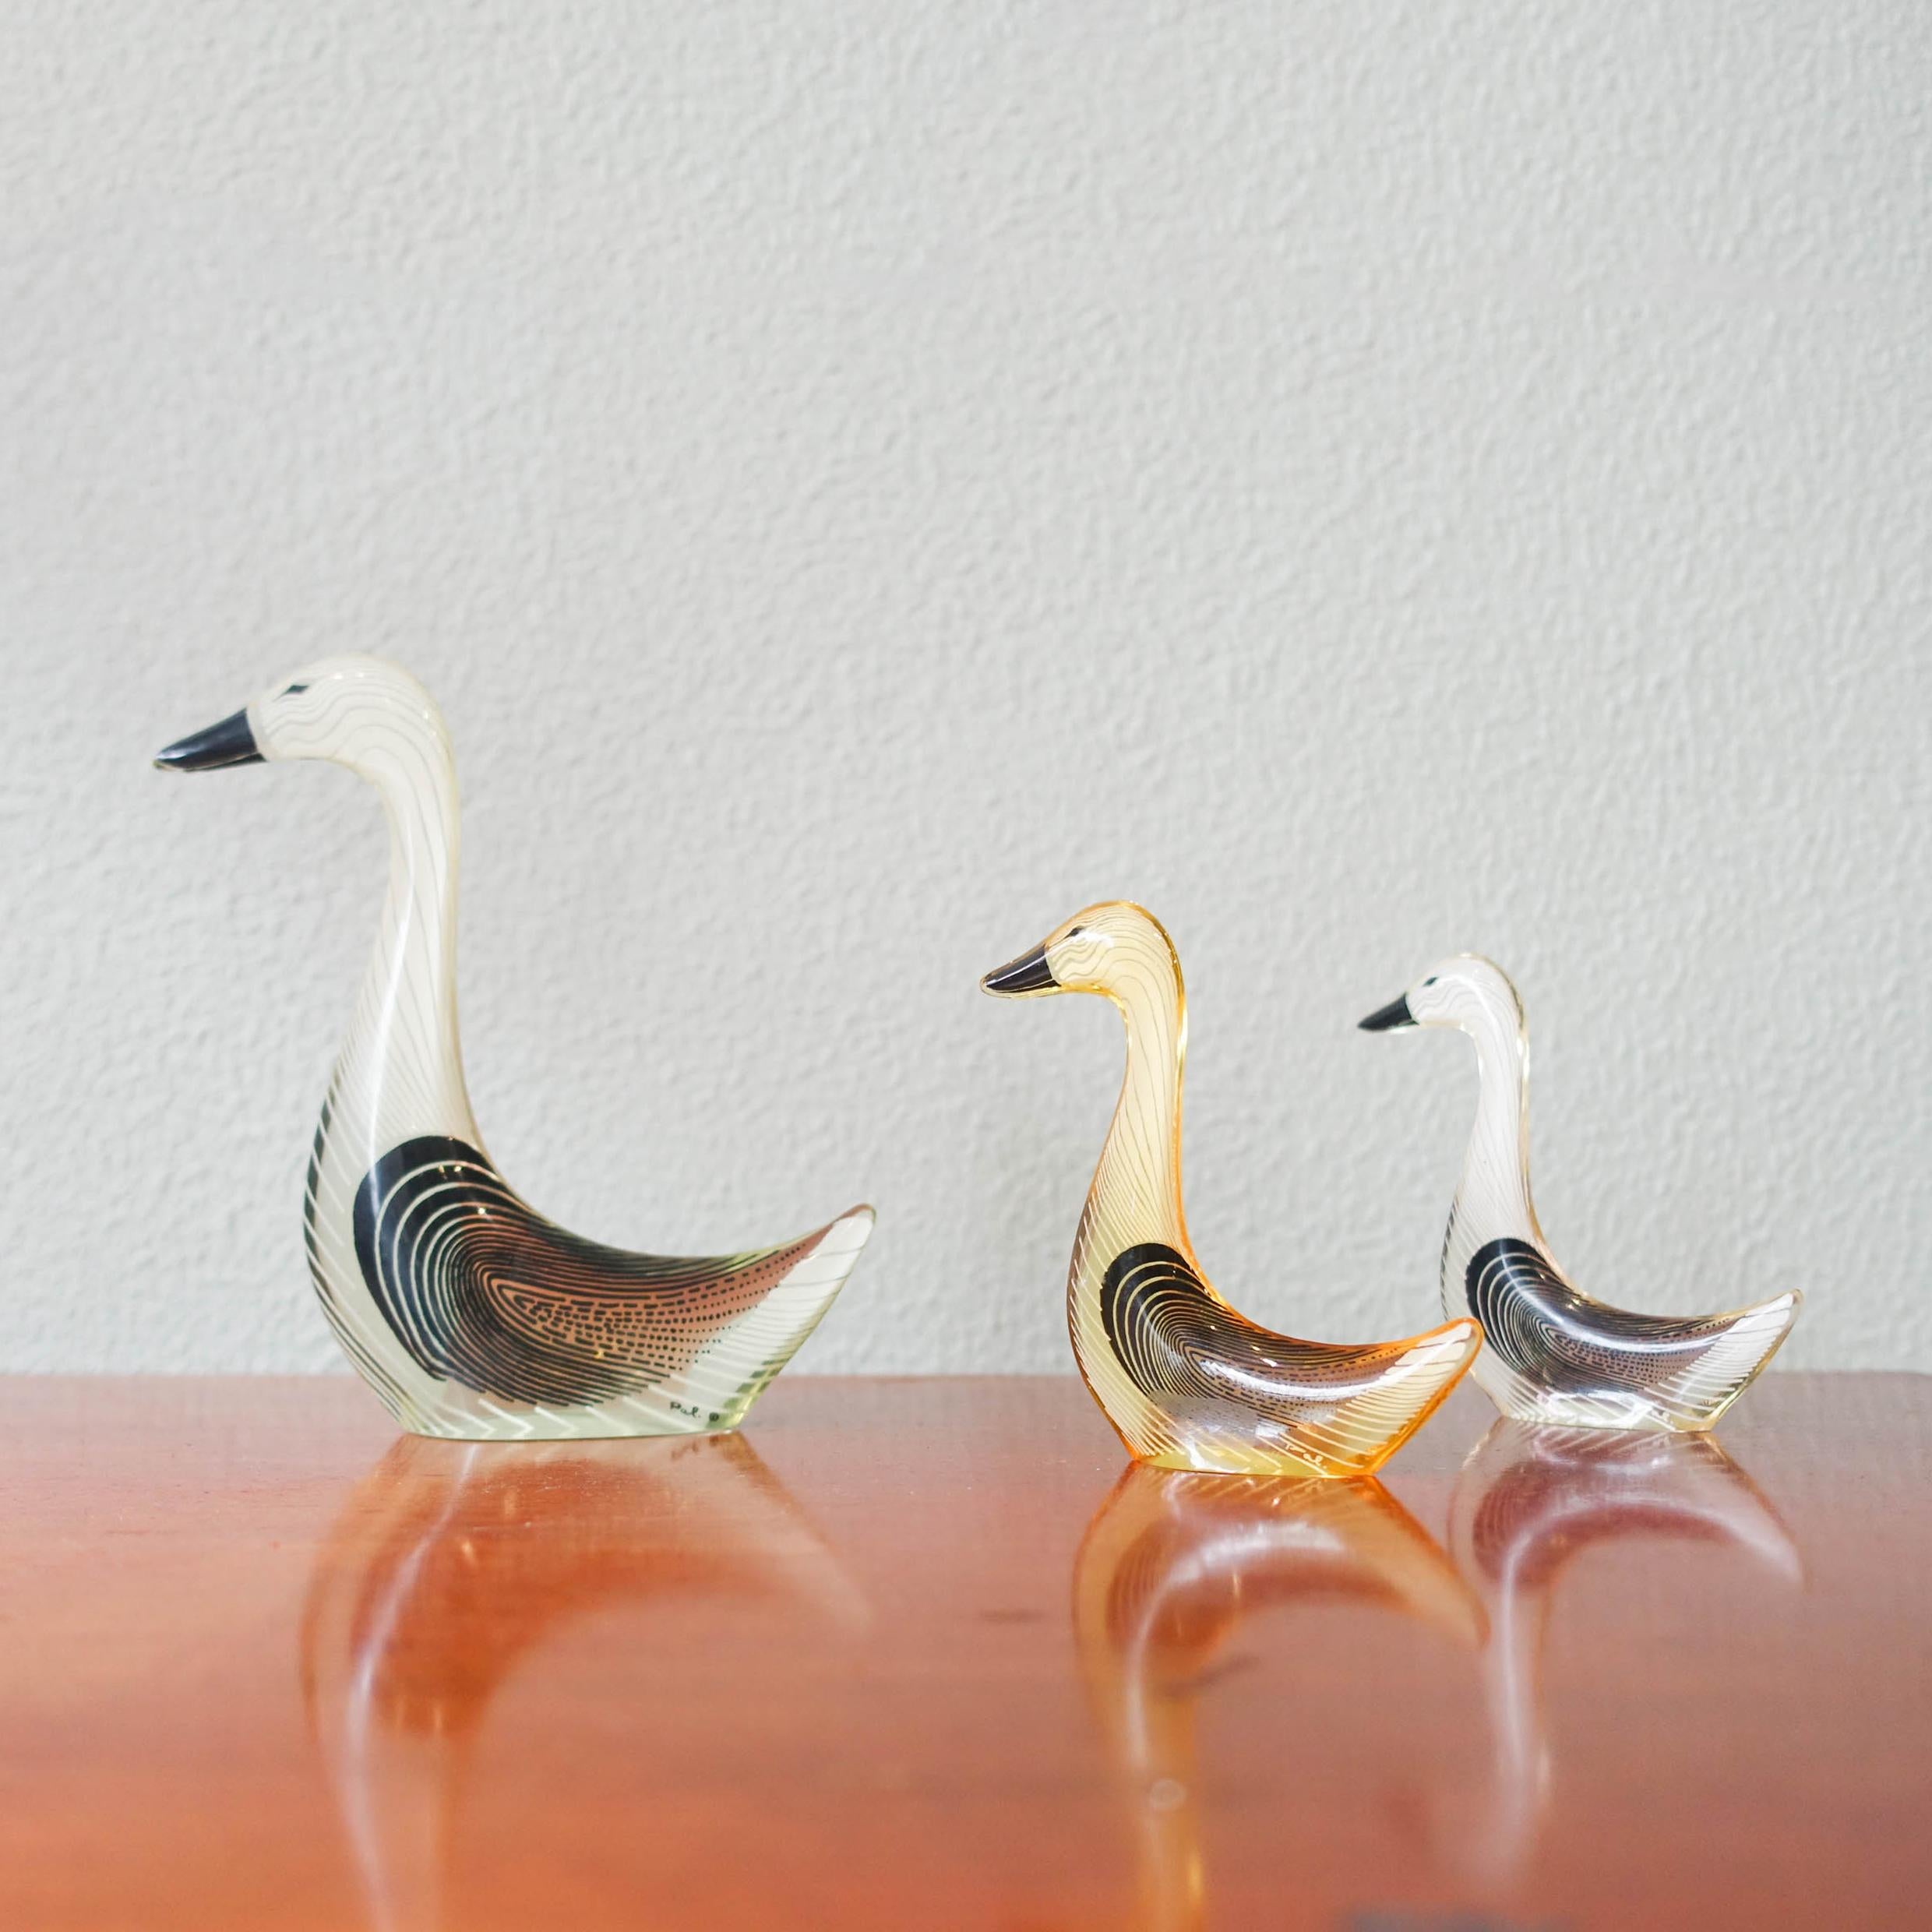 Kinetic Mid-Century Modern Set of Geese in Acrylic Glass by Abraham Palatnik, 1970's For Sale